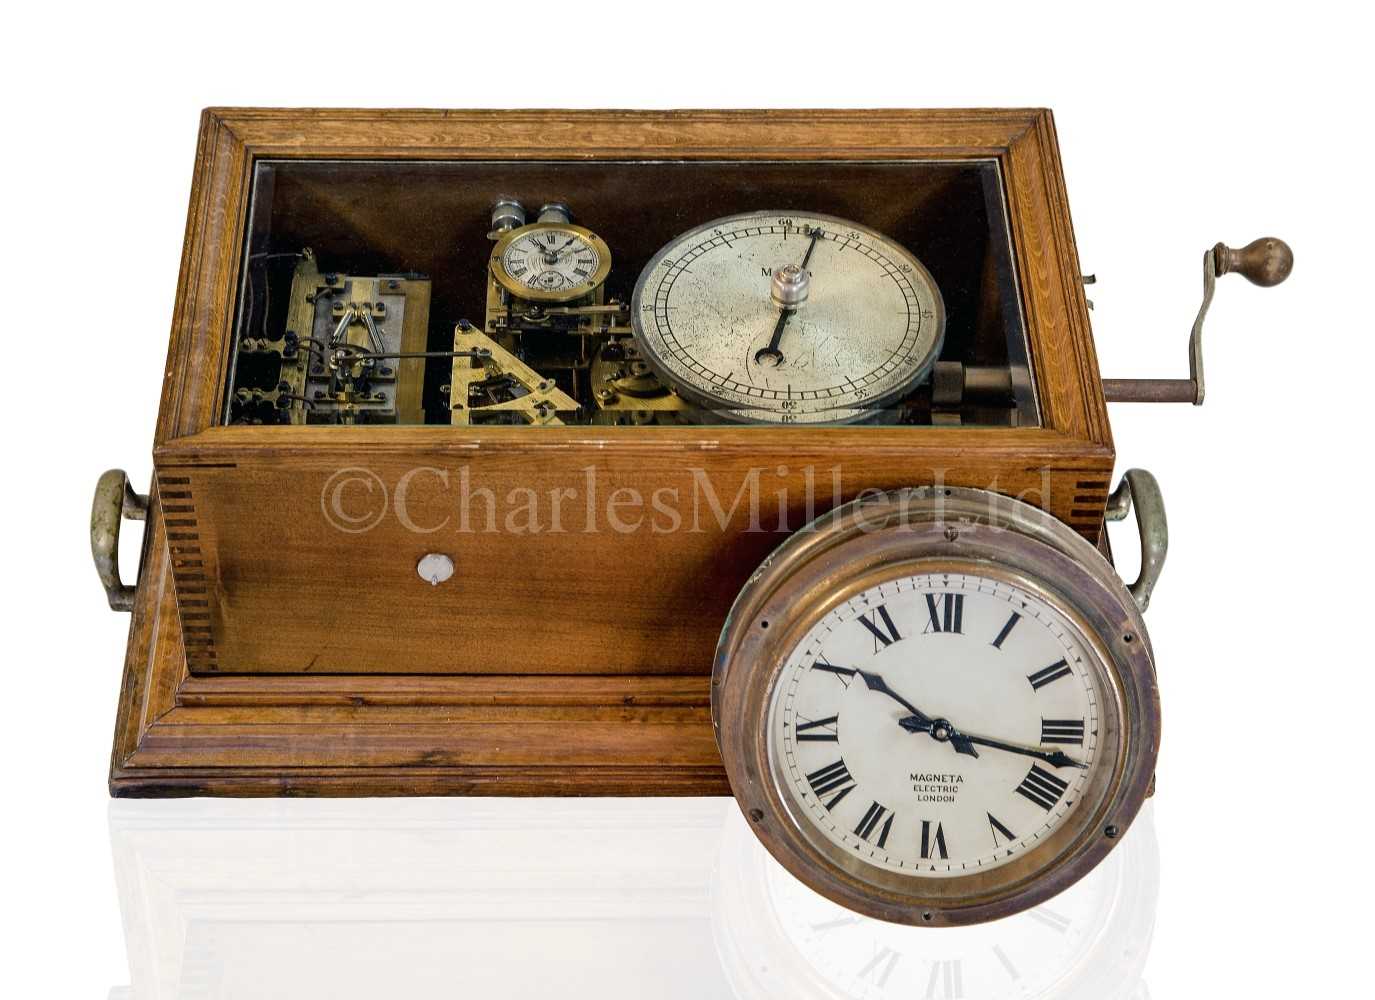 Lot 108 - A RARE MARINE MASTER CLOCK BY MAGNETA CO., CIRCA 1907, AND SUPPLIED TO WHITE STAR LINE